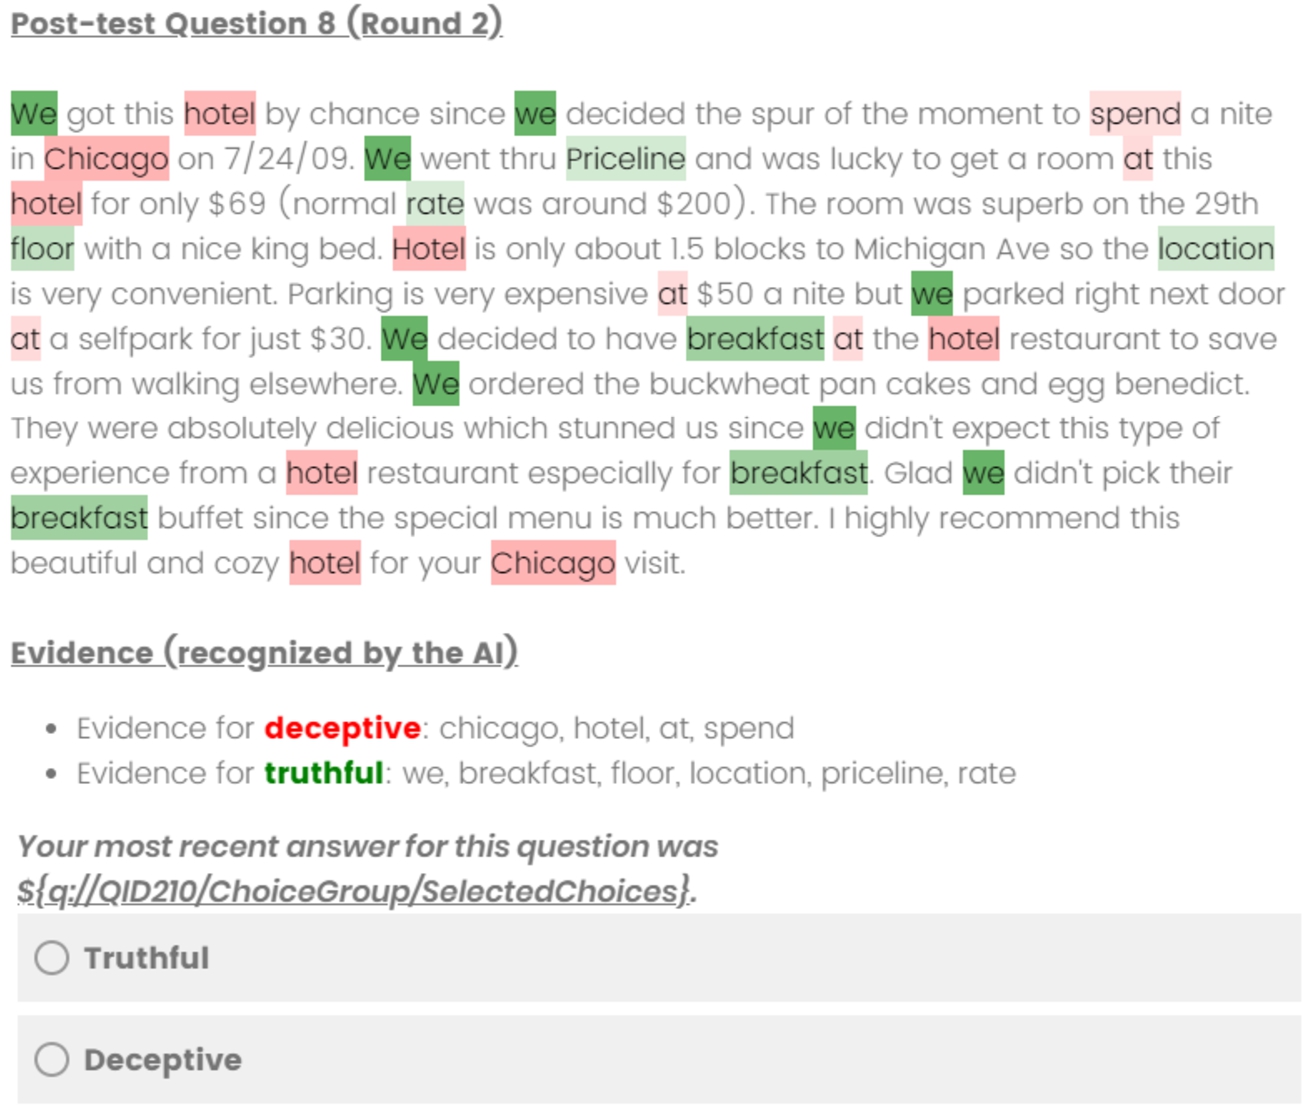 Example of a post-test question with real-time assistance using an SVM explanation.